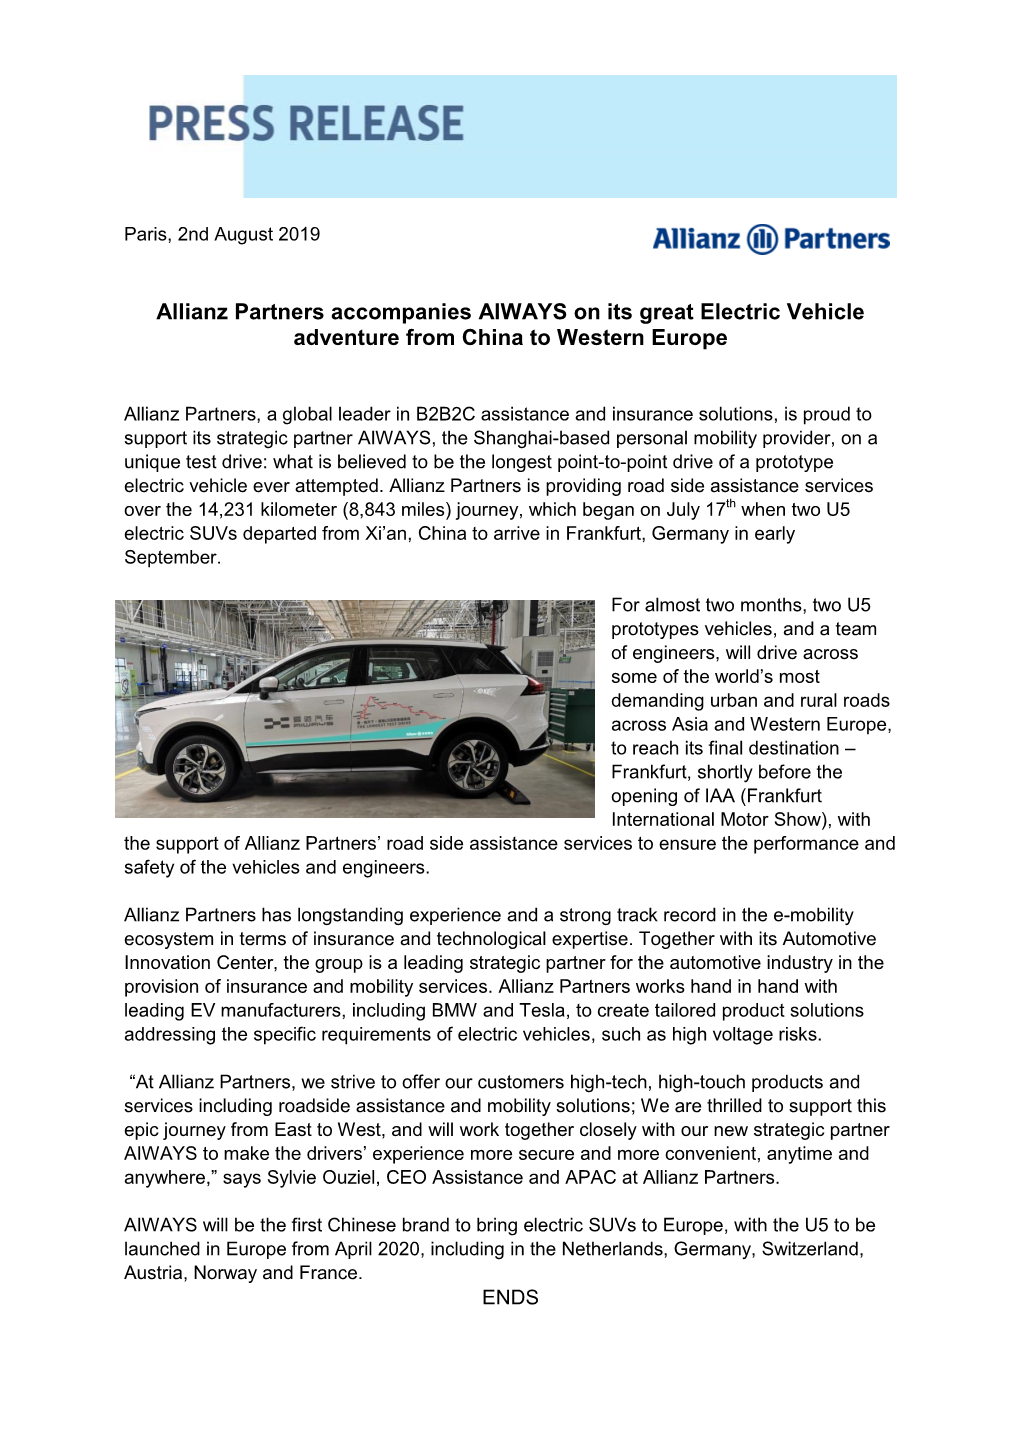 Allianz Partners Accompanies AIWAYS on Its Great Electric Vehicle Adventure from China to Western Europe